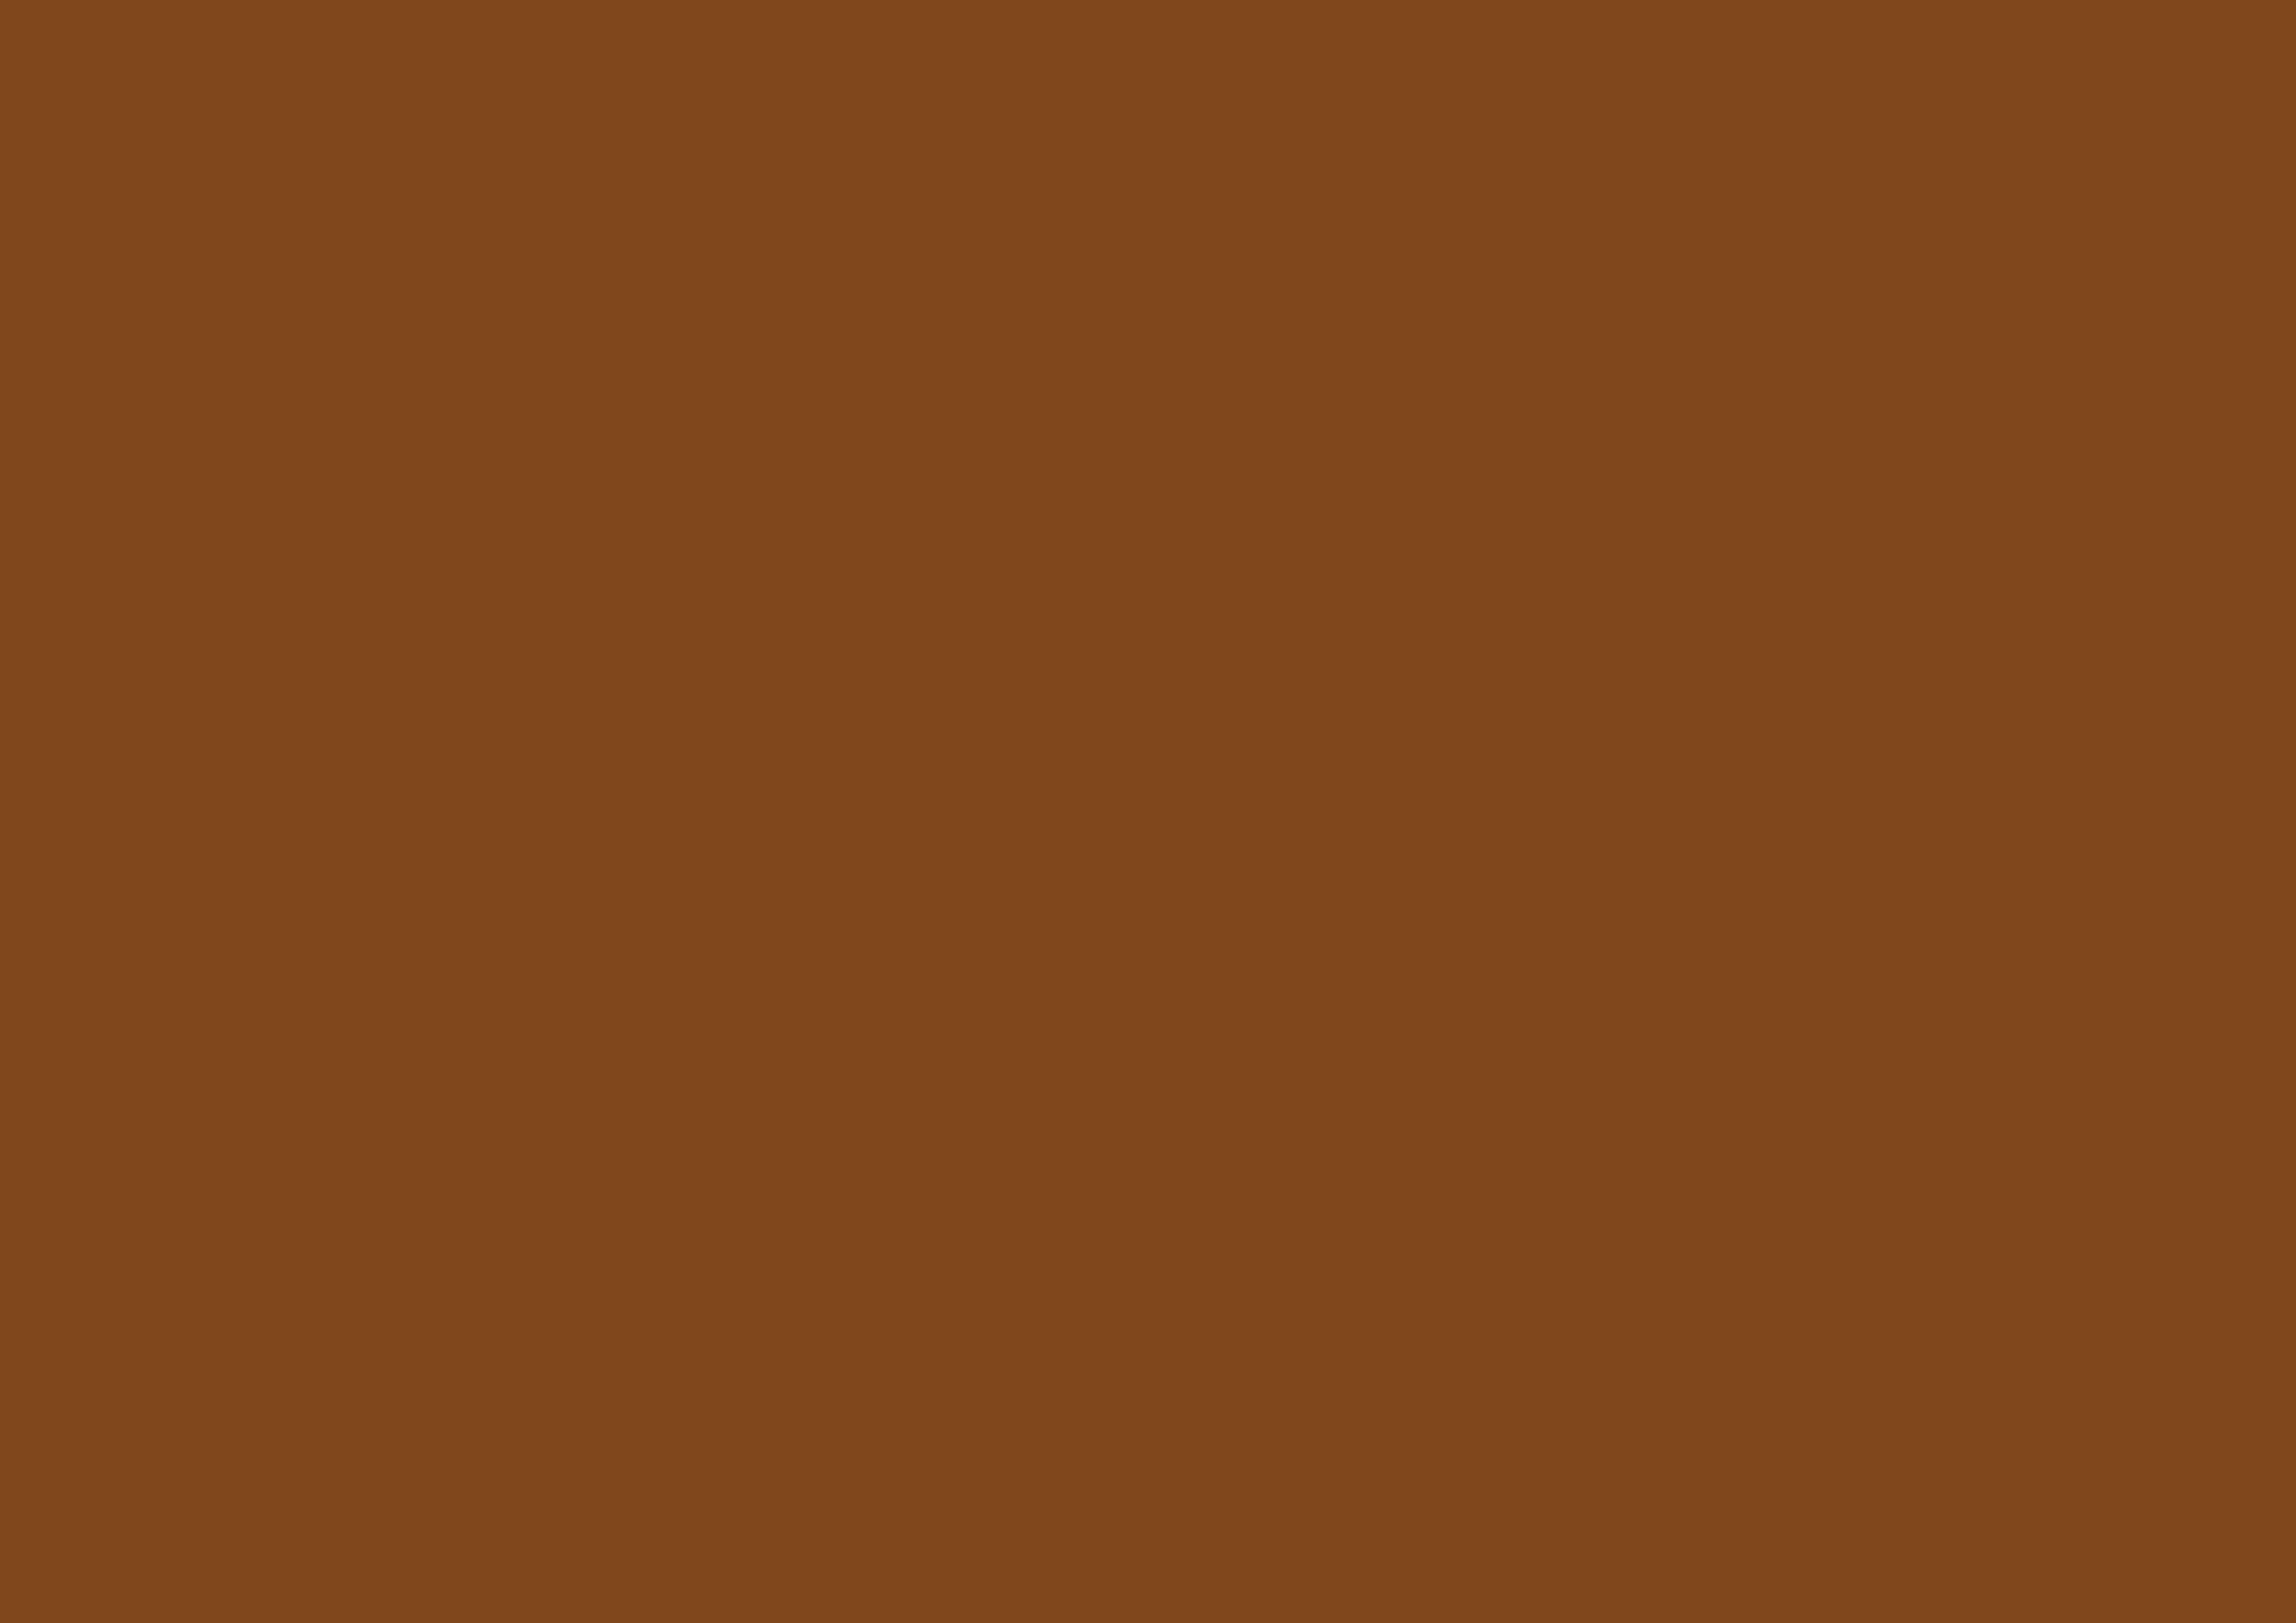 3508x2480 Russet Solid Color Background